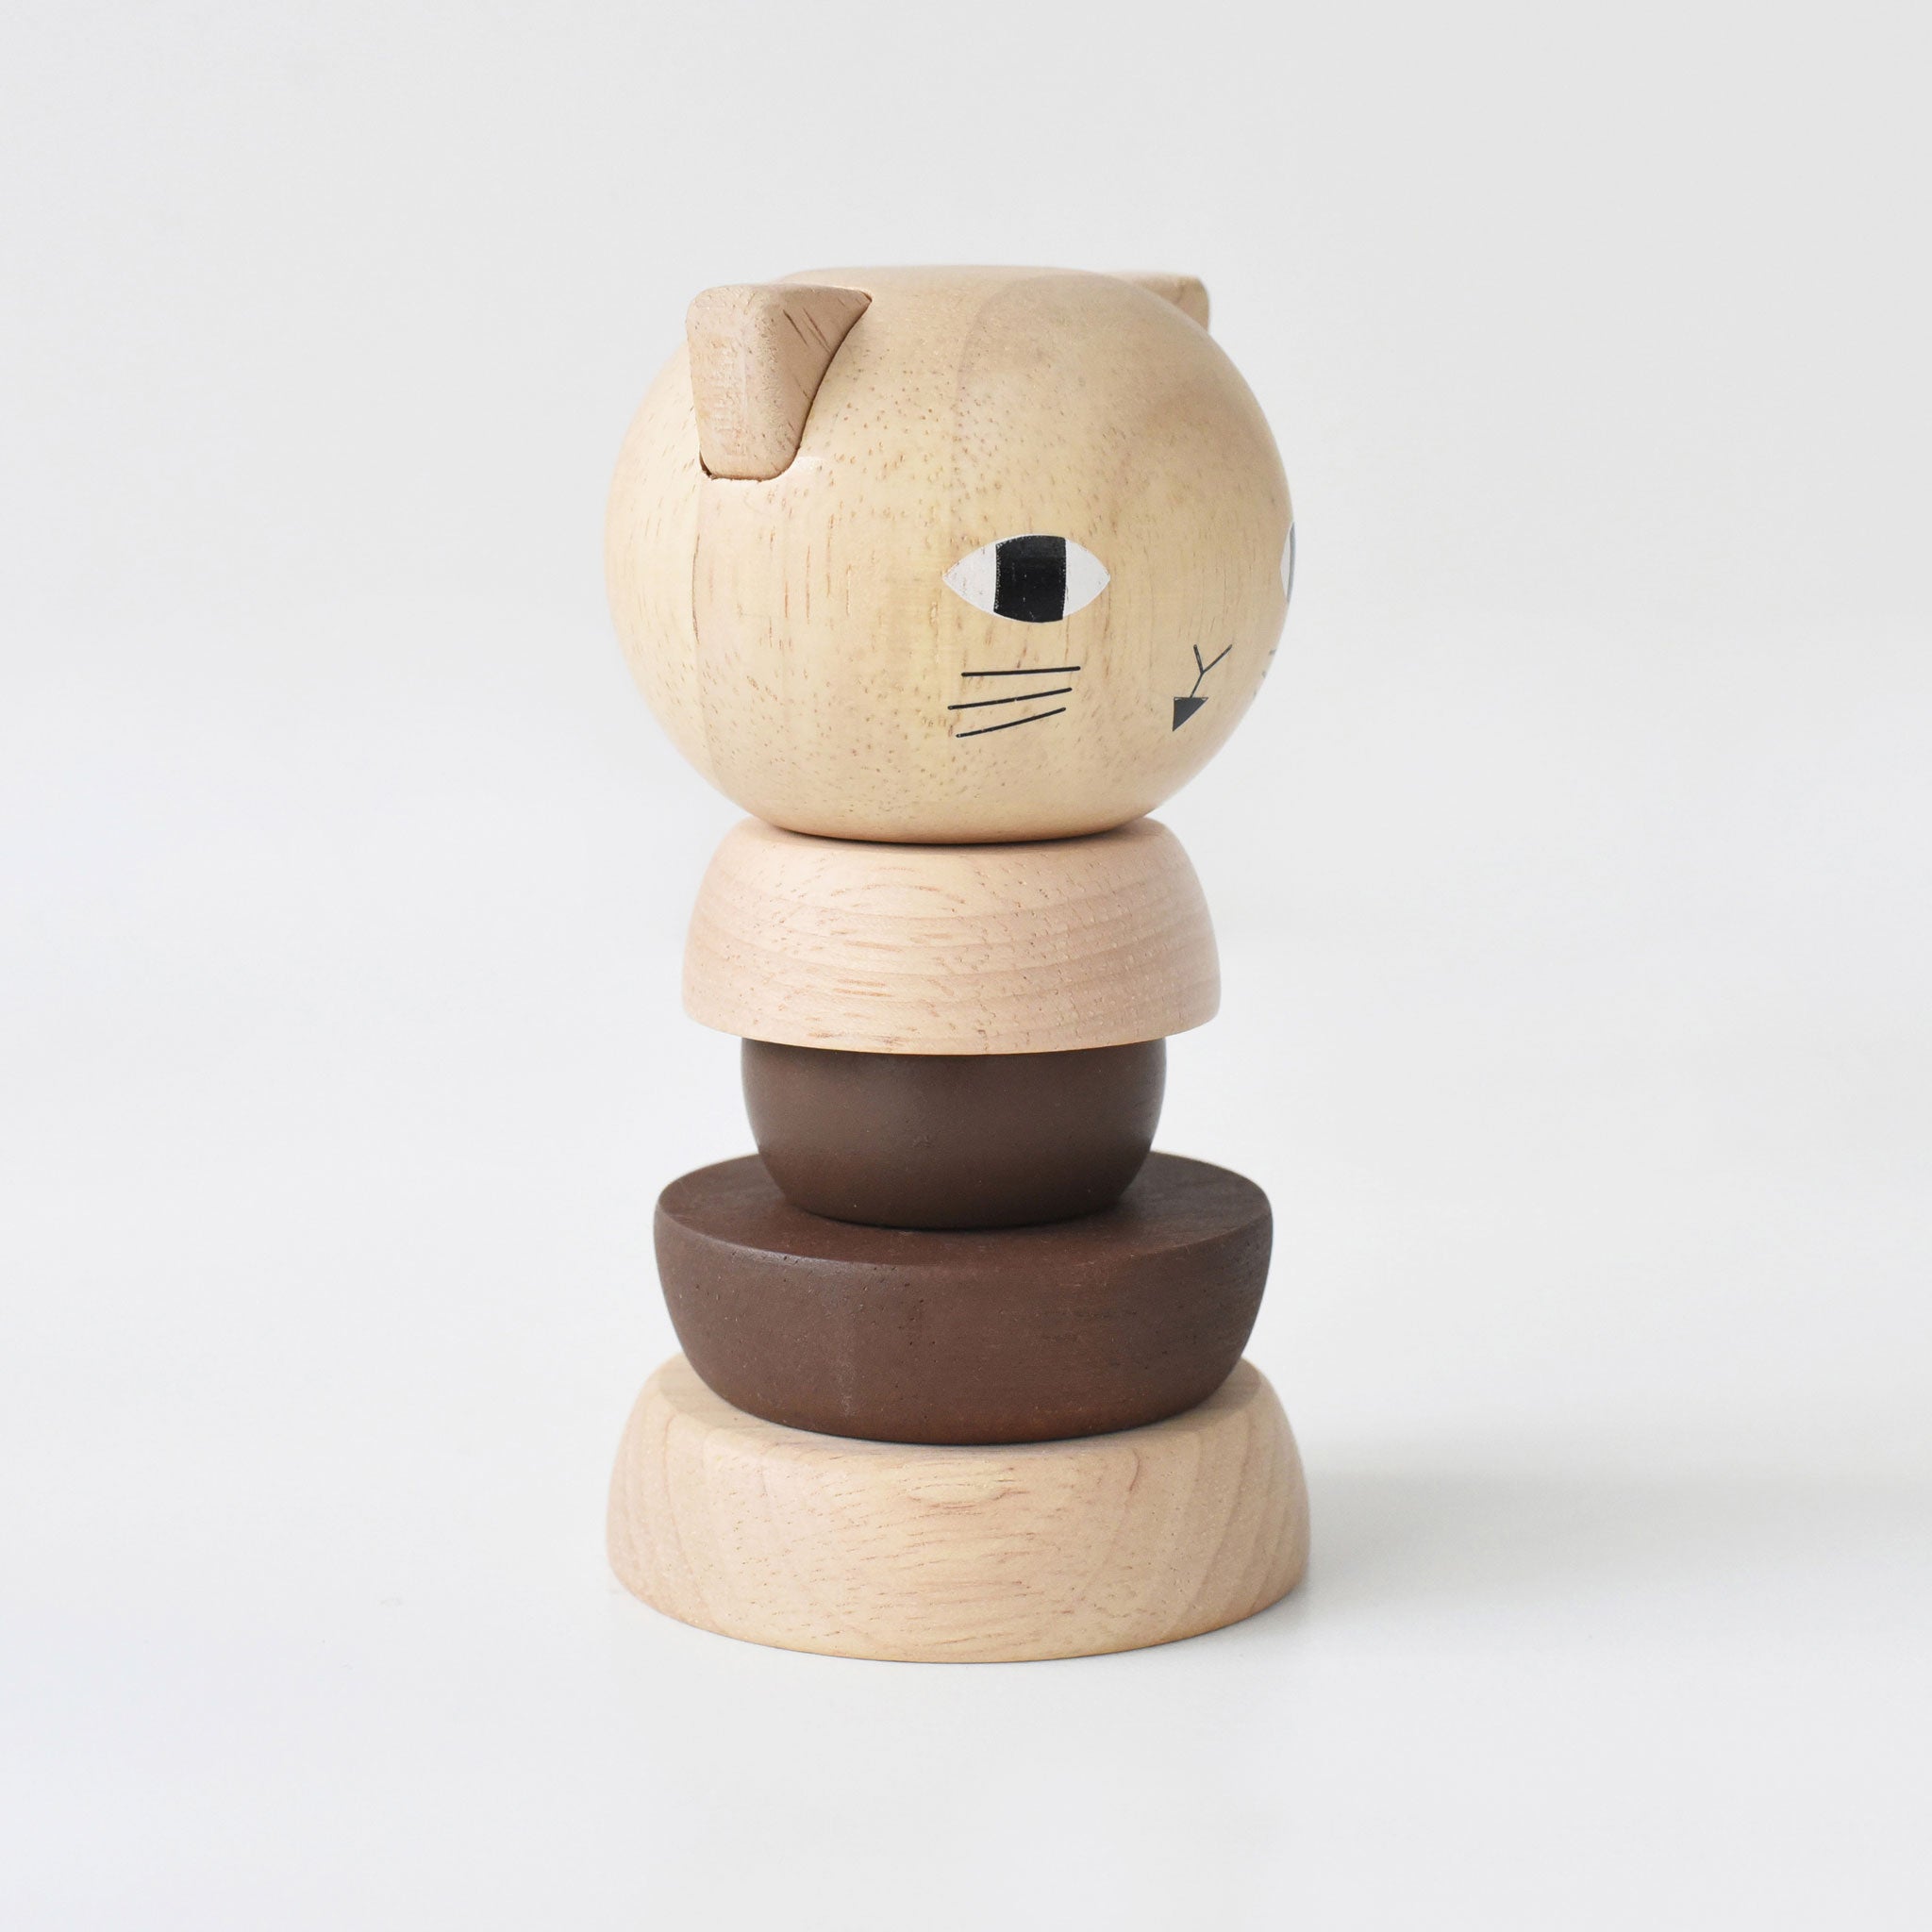 Wooden Toy Stacking Rings - 3 Towers - My Wooden Toys